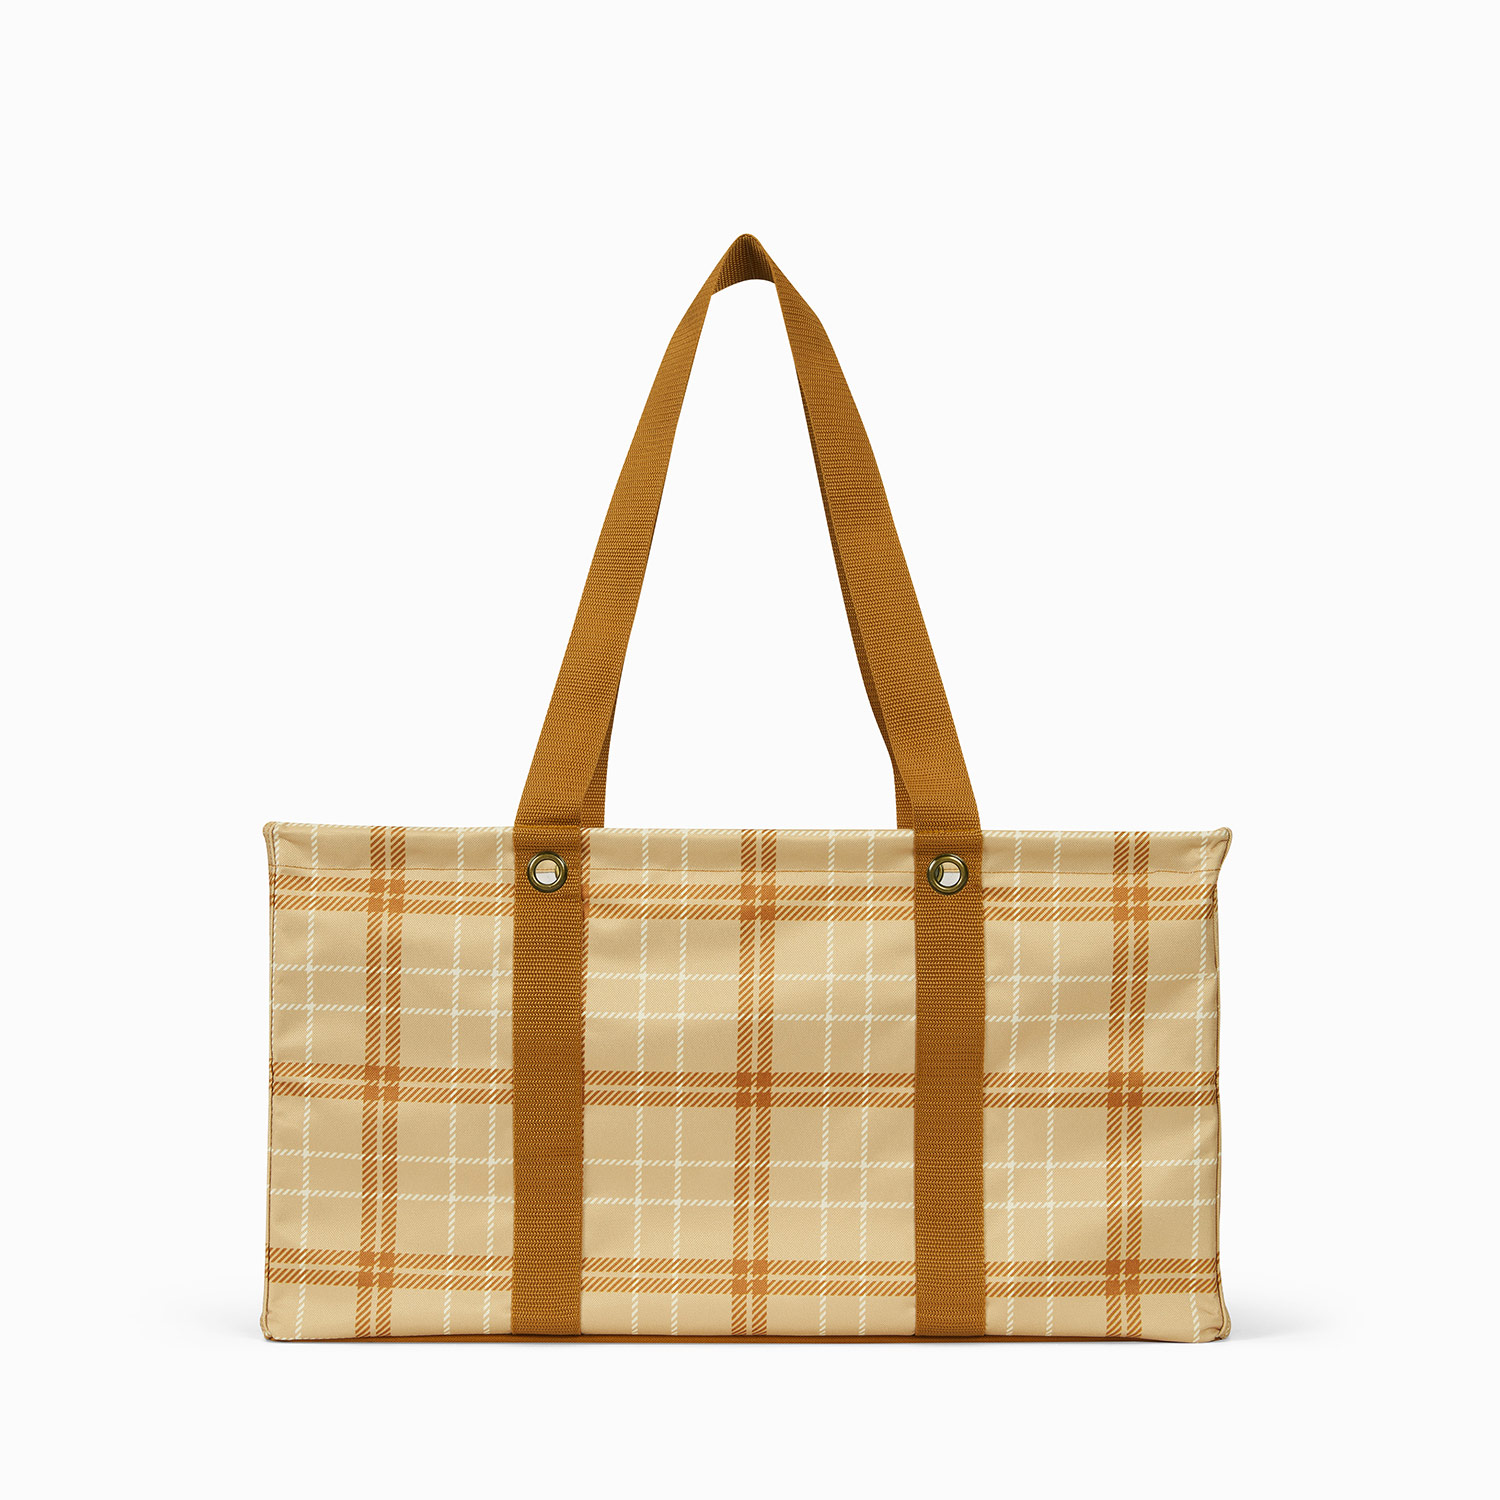 thirty-one, Bags, Deluxe Utility Tote In Holiday Plaid